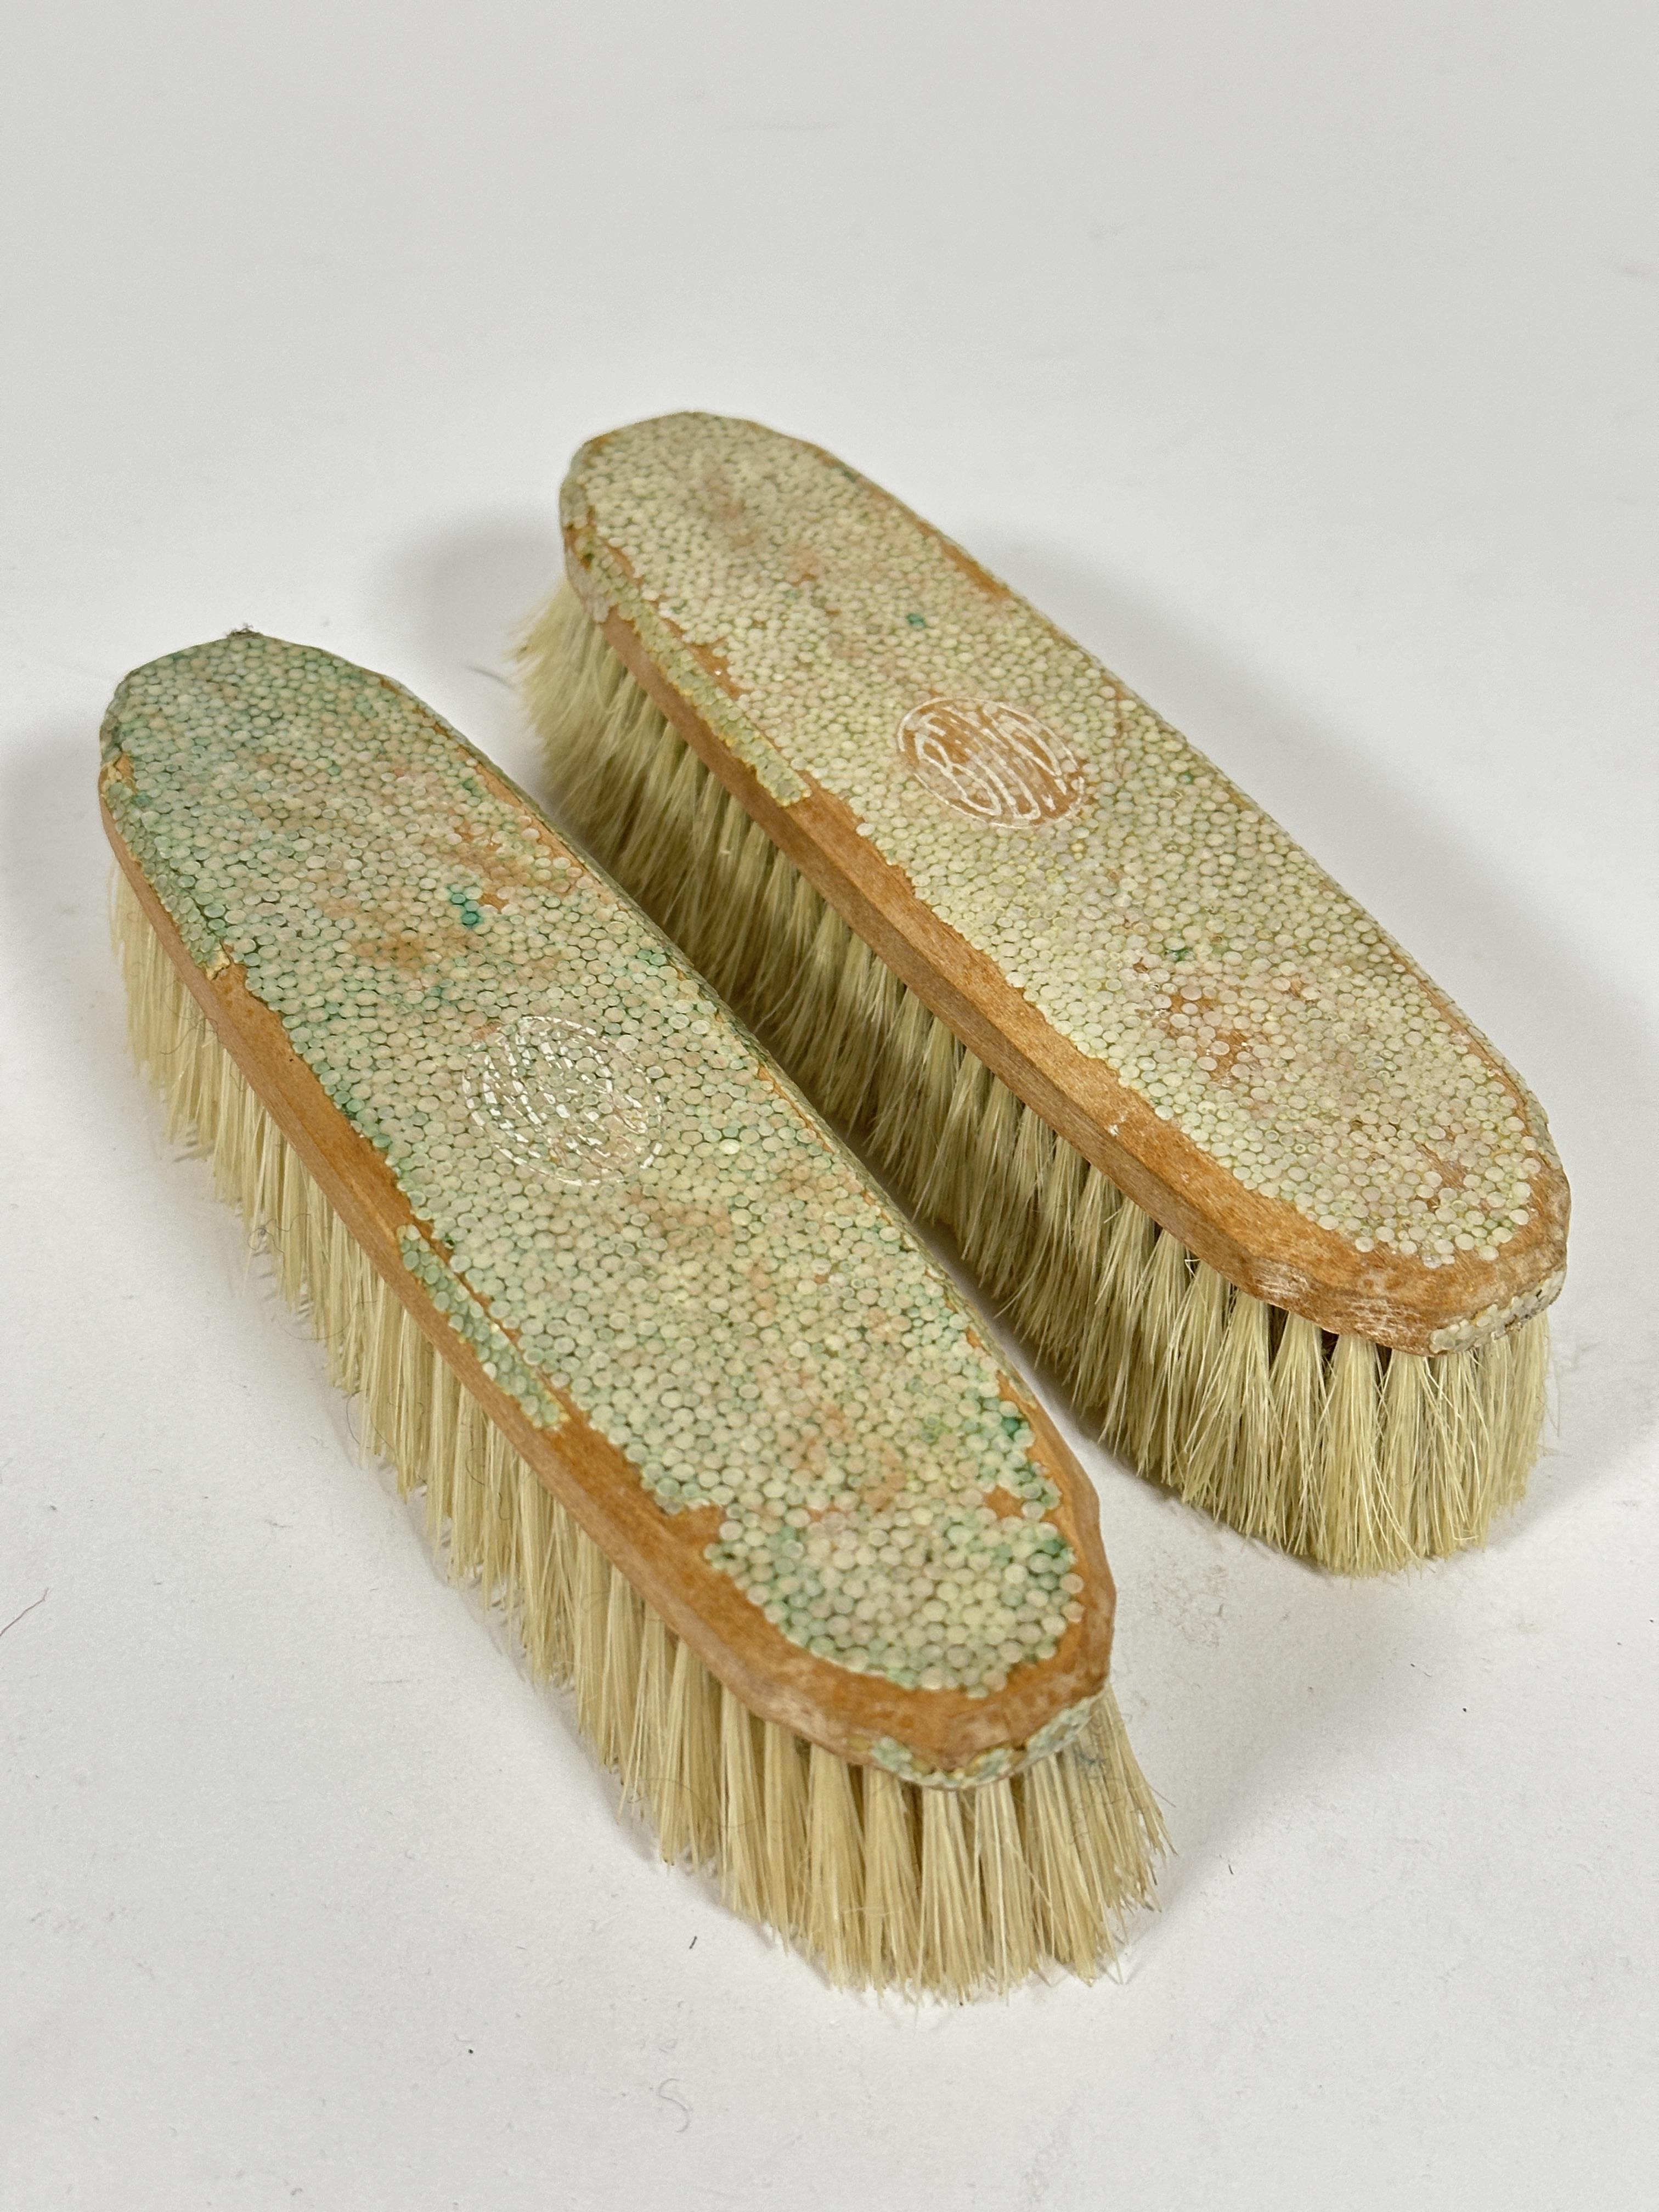 A 1930s shagreen pair of clothes brushes, losses to surfaces of both. (L x 17 cm)